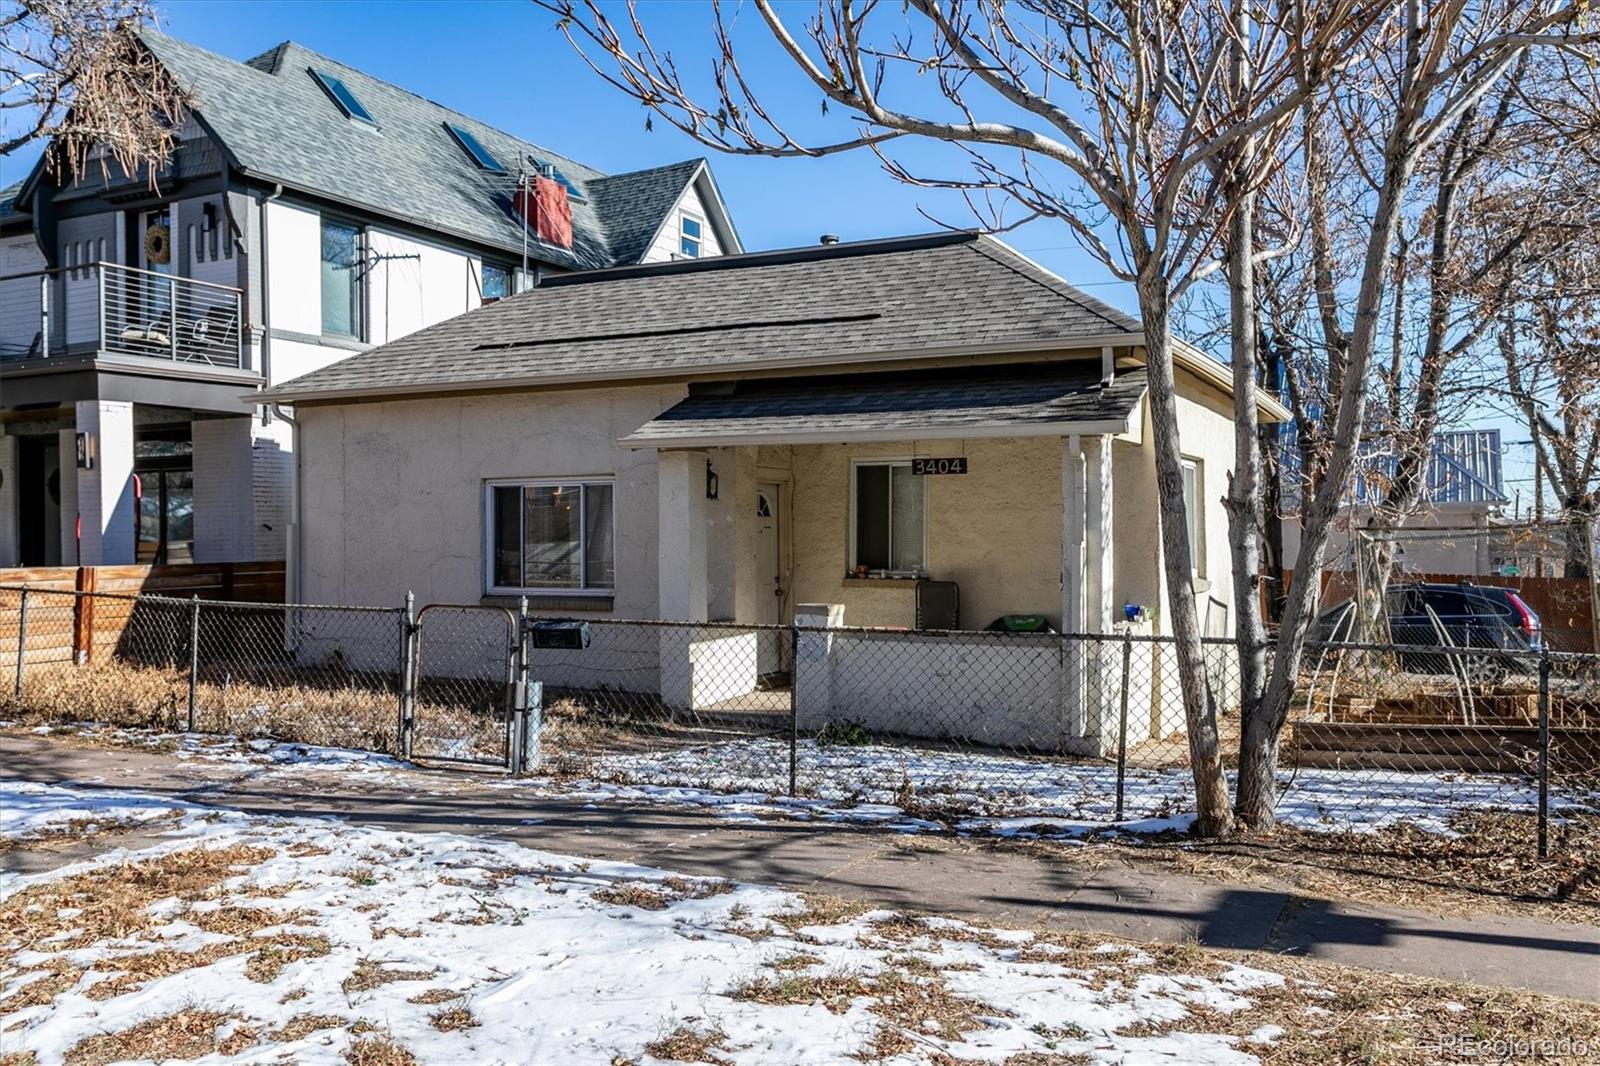 3404  pecos street, denver sold home. Closed on 2024-04-23 for $509,000.